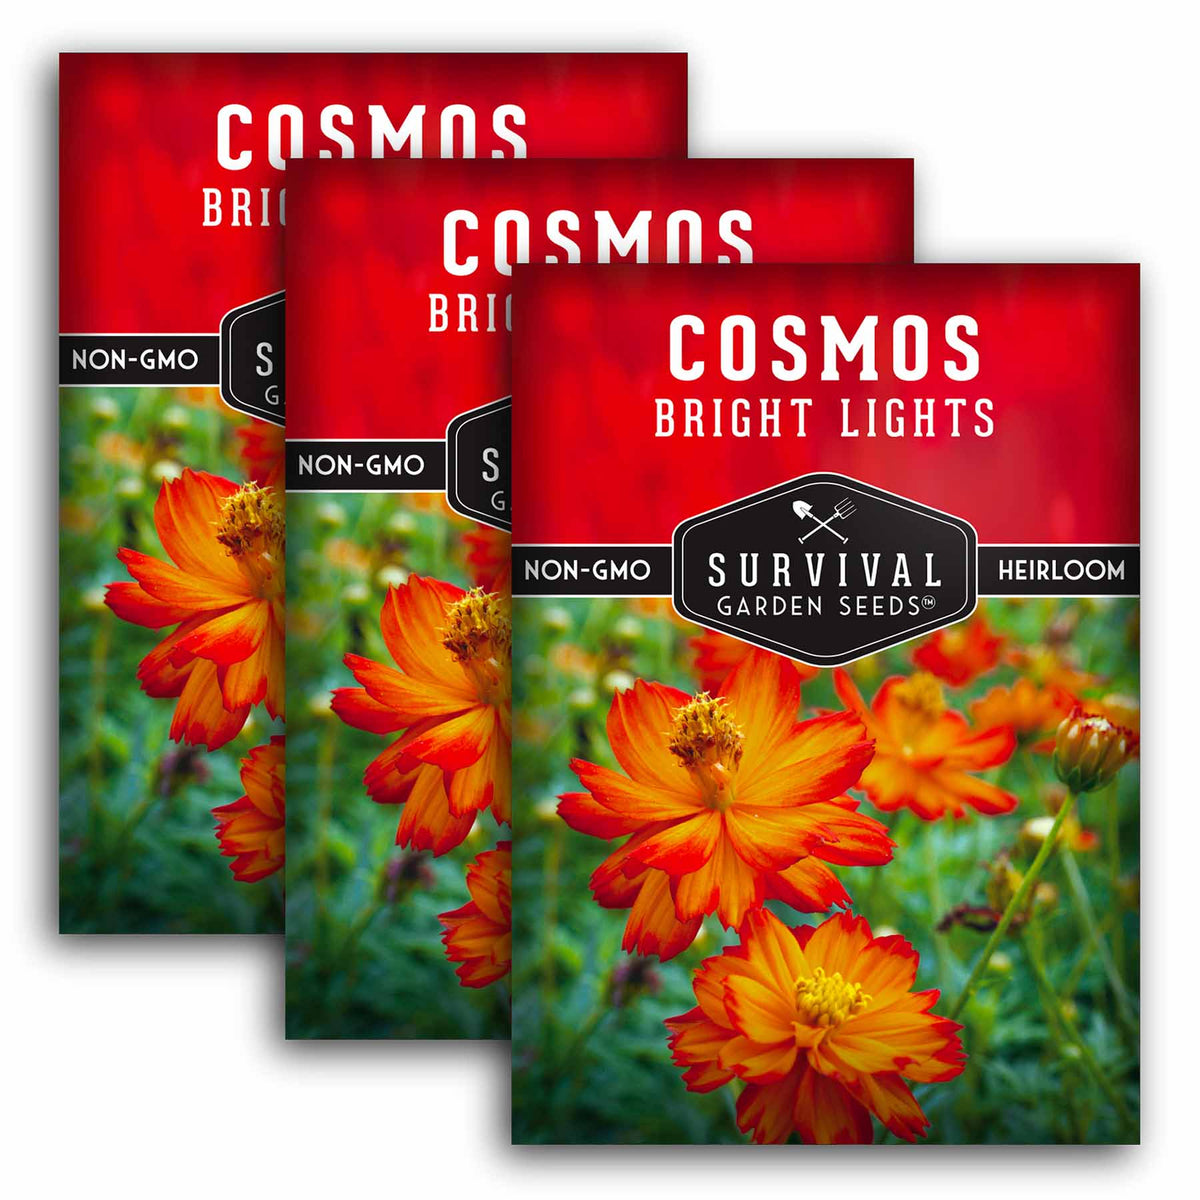 3 packets of Bright Lights Cosmos seeds